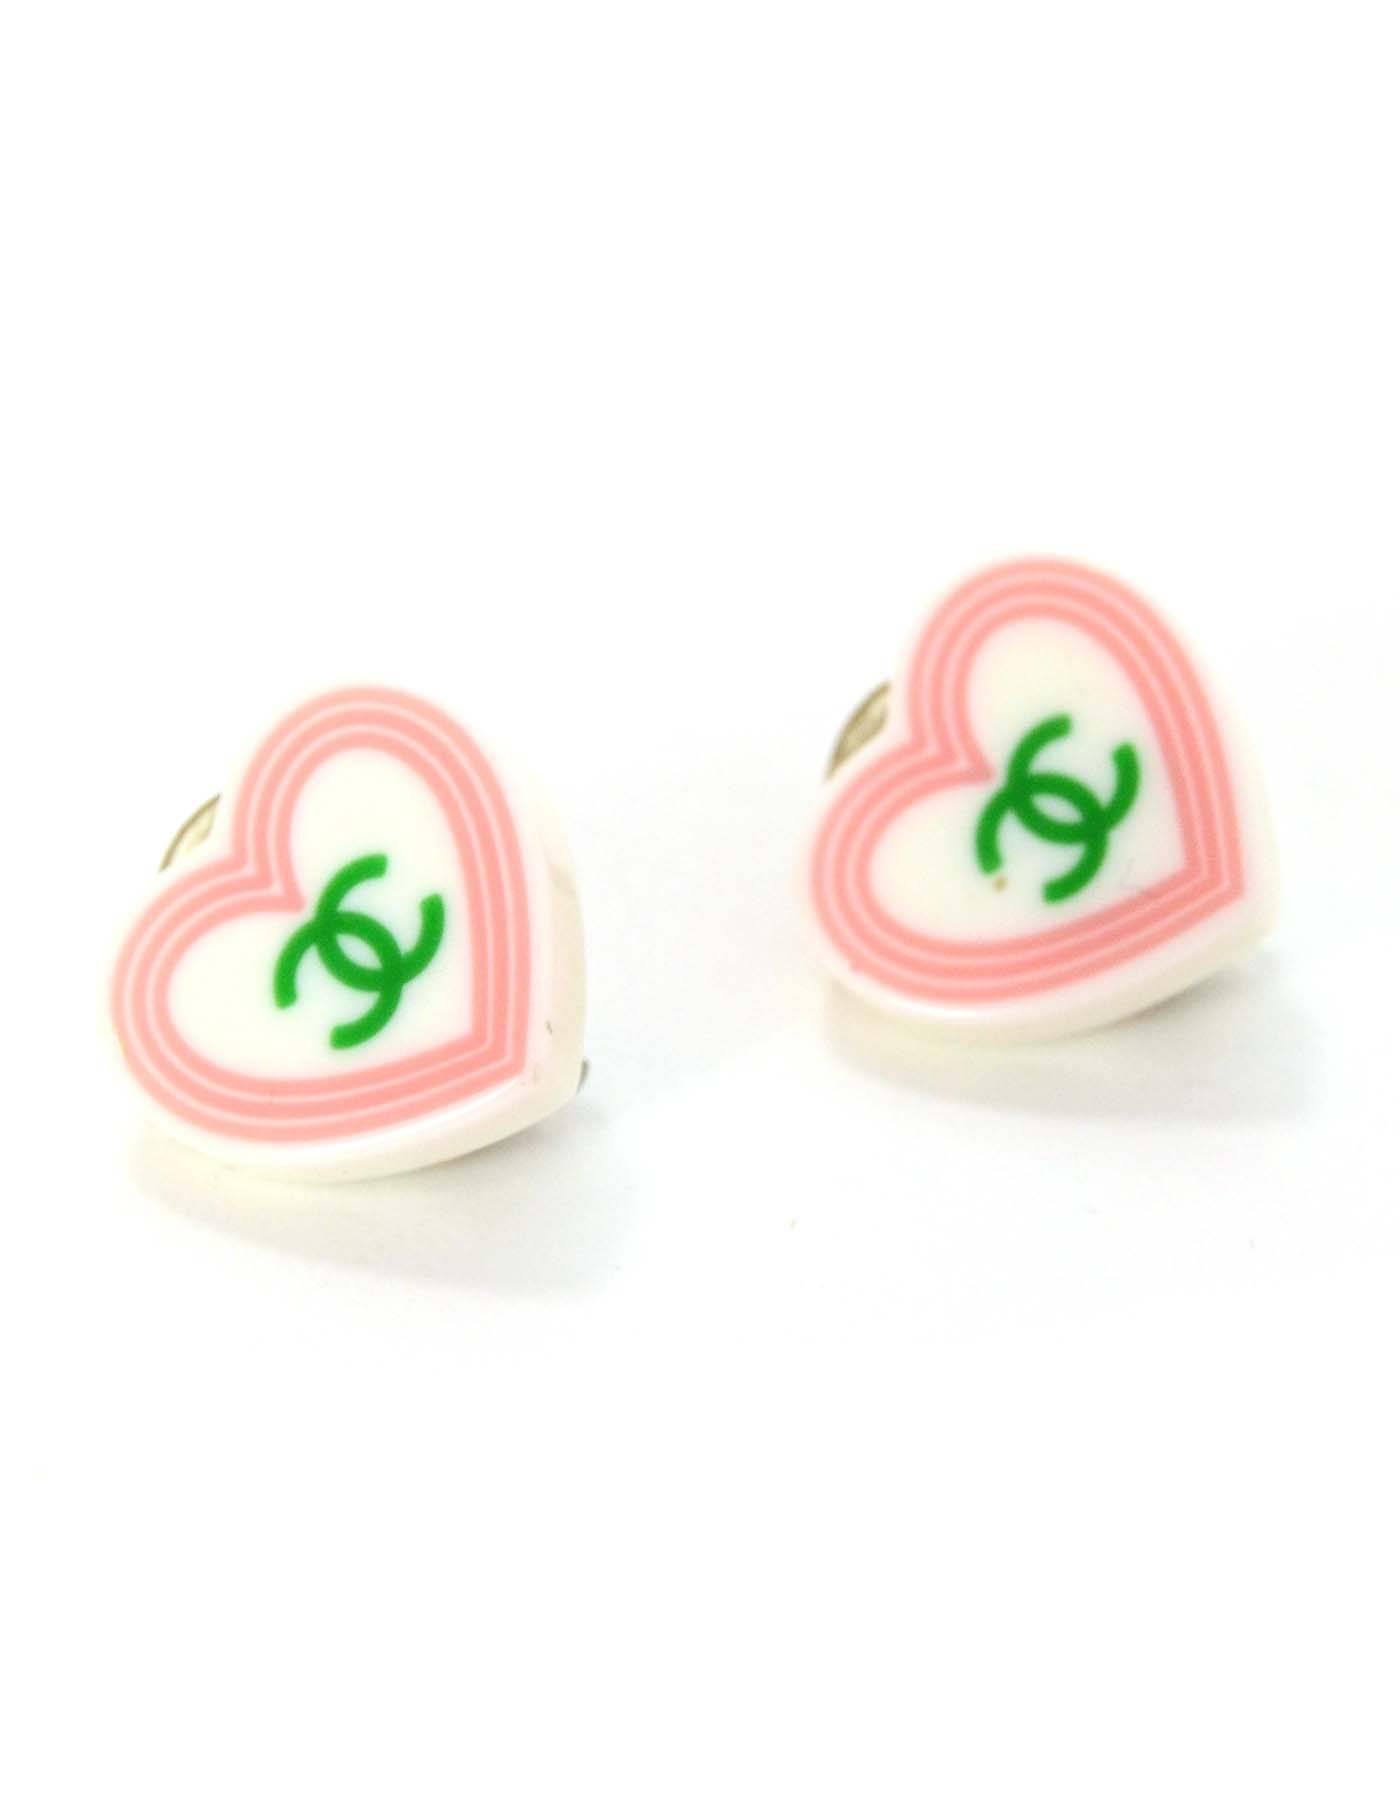 Chanel Heart Shape CC Clip On Earrings
Feature a green CC logo with a pink outlined border 
Made In: France
Year of Production: 2004
Stamp: 04 CC 
Closure: Clip on
Color: White, pink and green
Materials: Plastic and metal 
Overall Condition: